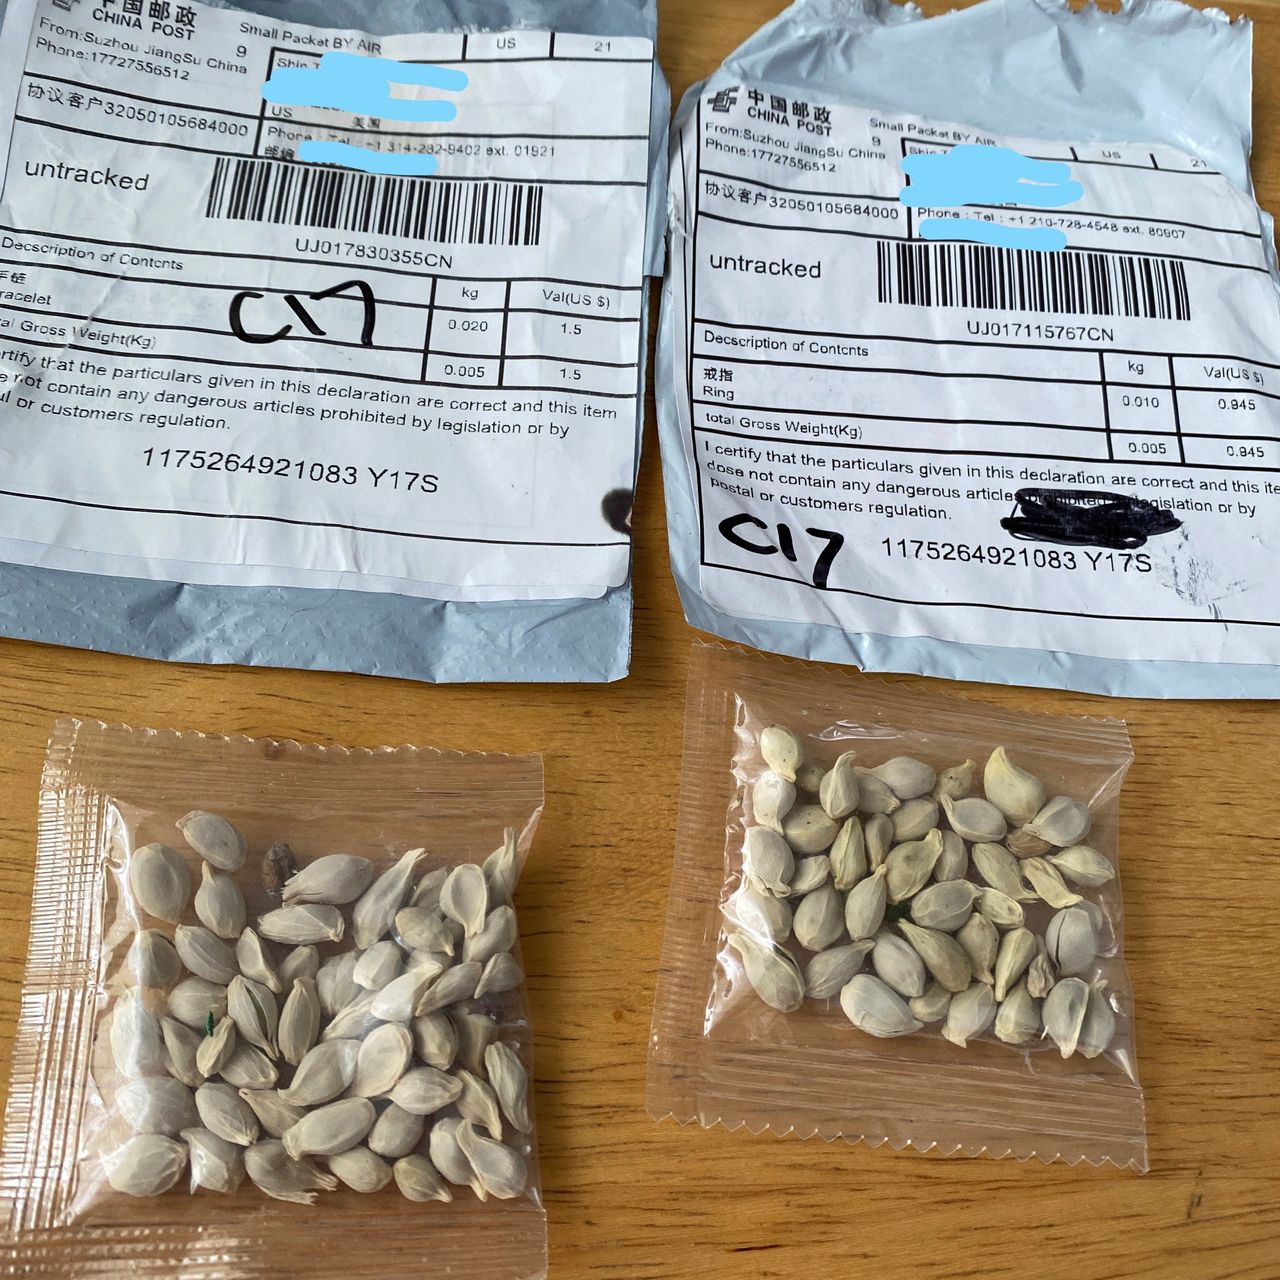 Mystery seeds from china